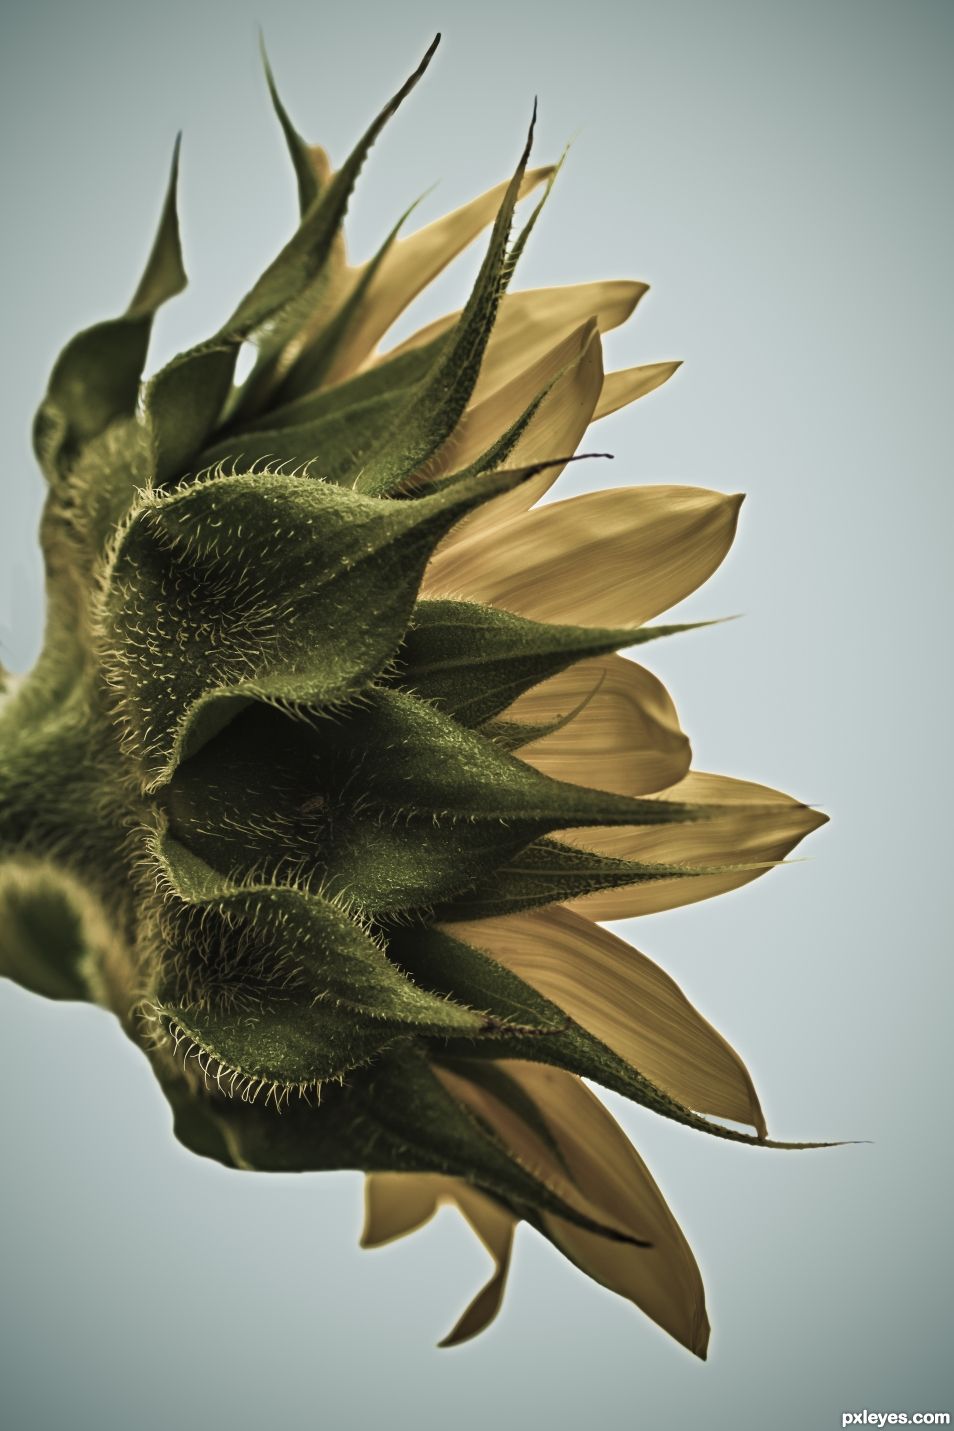 Sunflower from the side